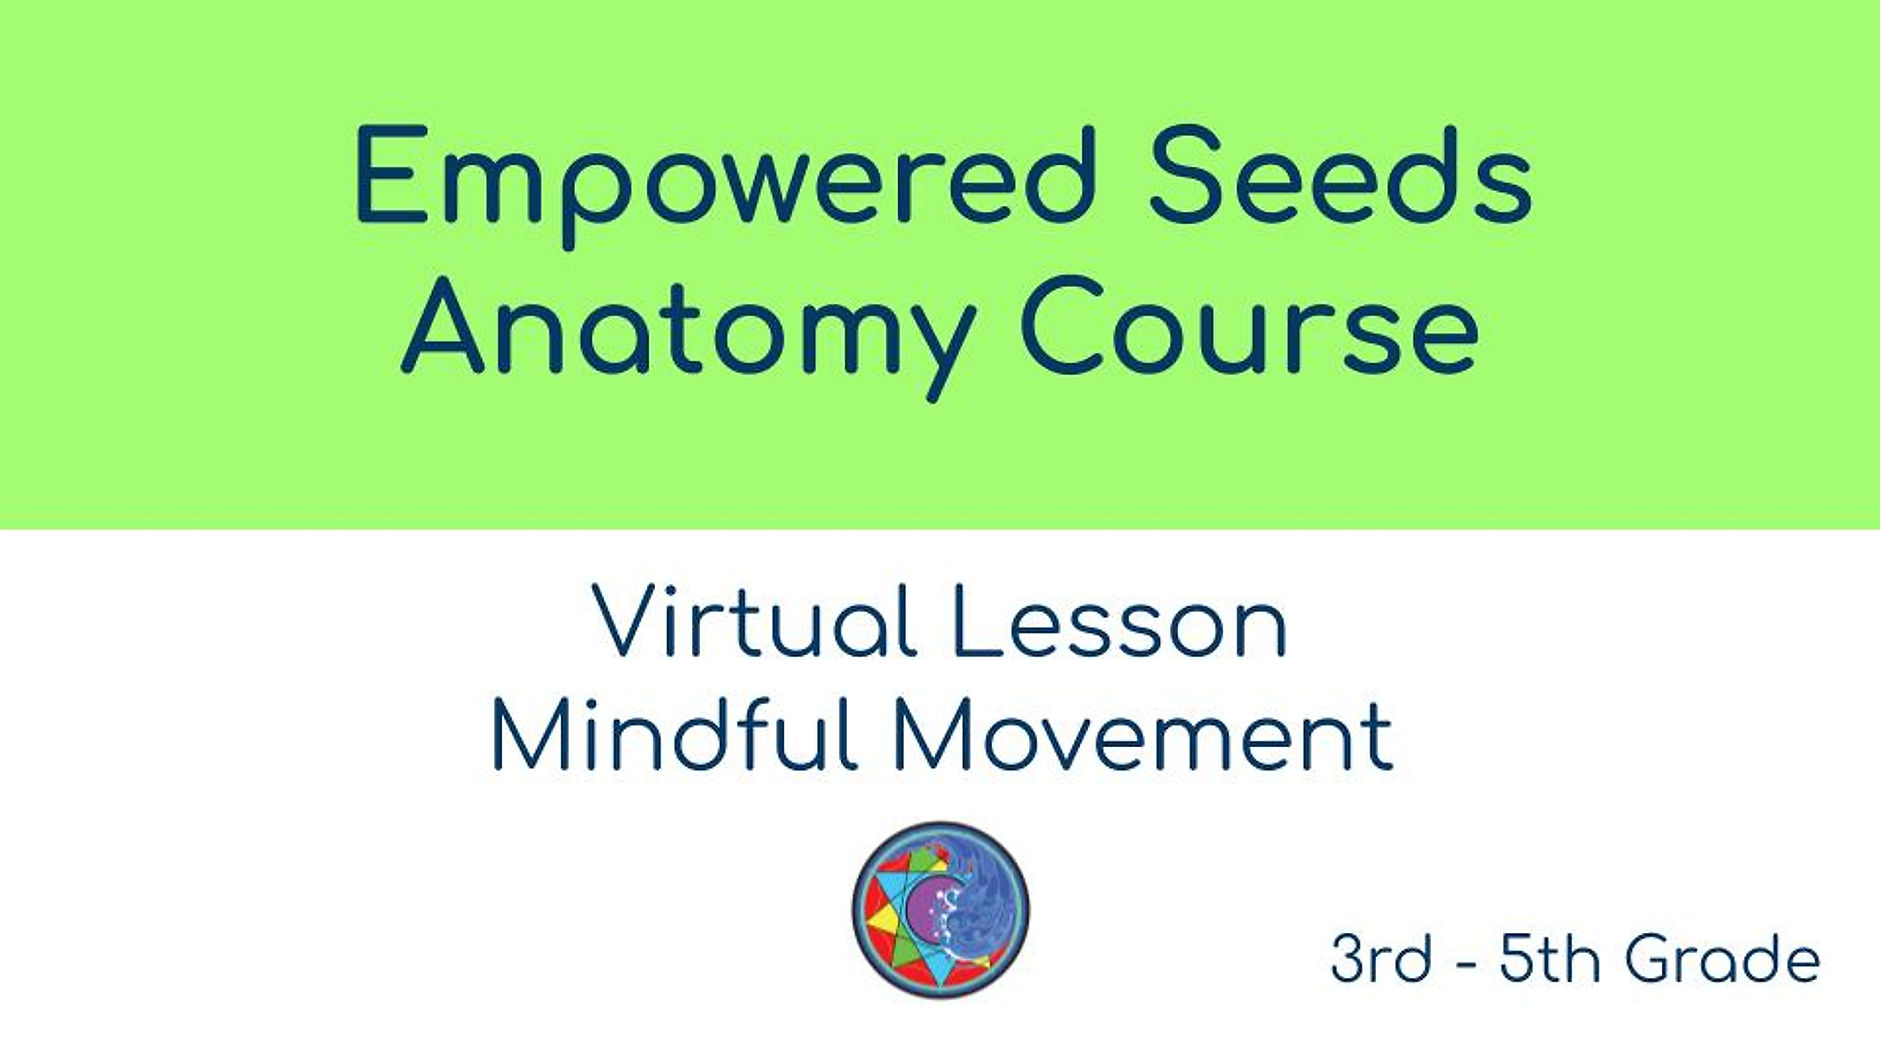 Empowered Seeds Virtual Mindful Movement